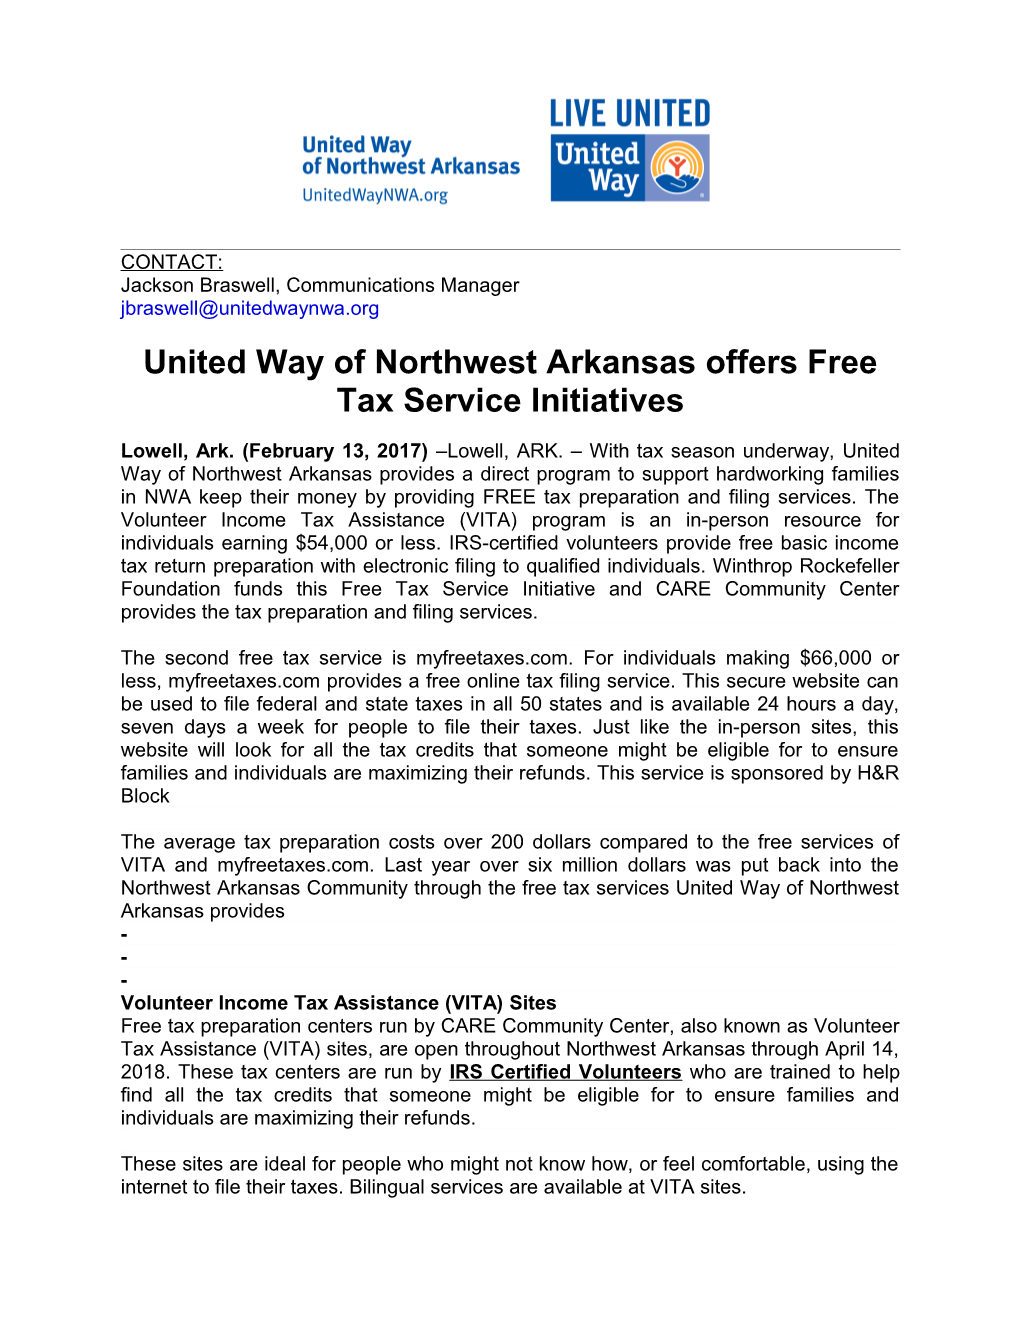 United Way of Northwest Arkansas Offers Free Tax Service Initiatives